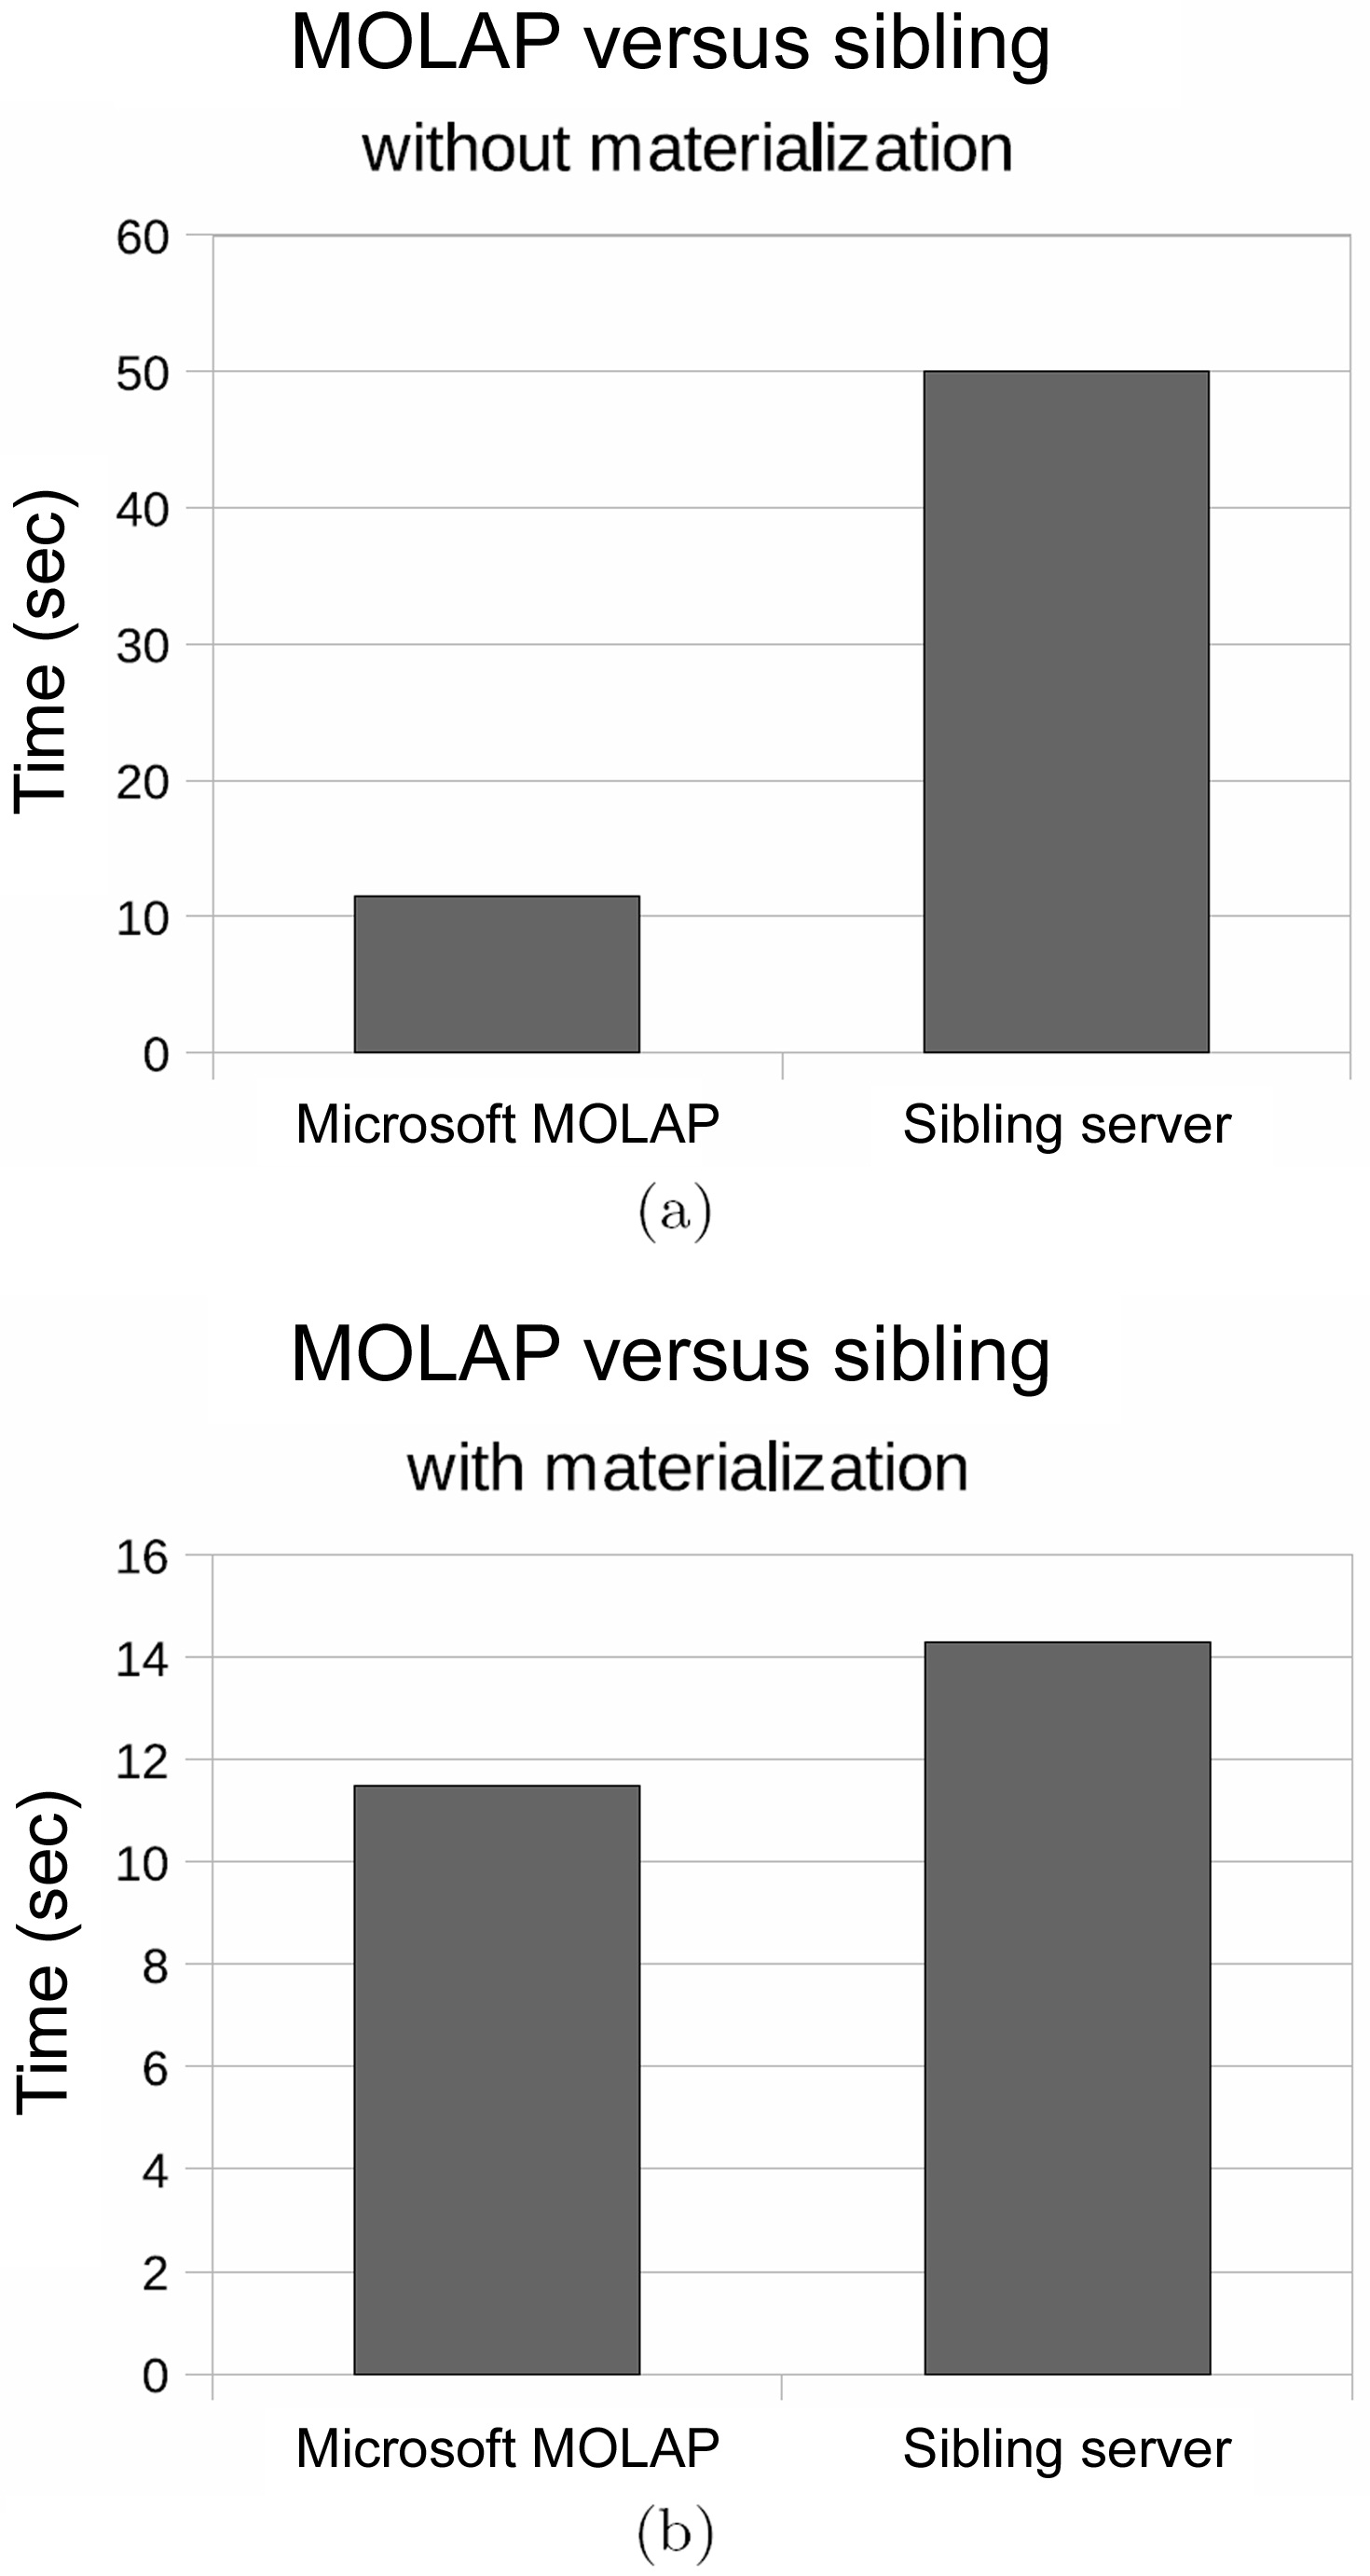 (a) Multi-dimensional online analytical process (MOLAP) versus non-materialized sibling, (b) MOLAP versus materialized sibling.